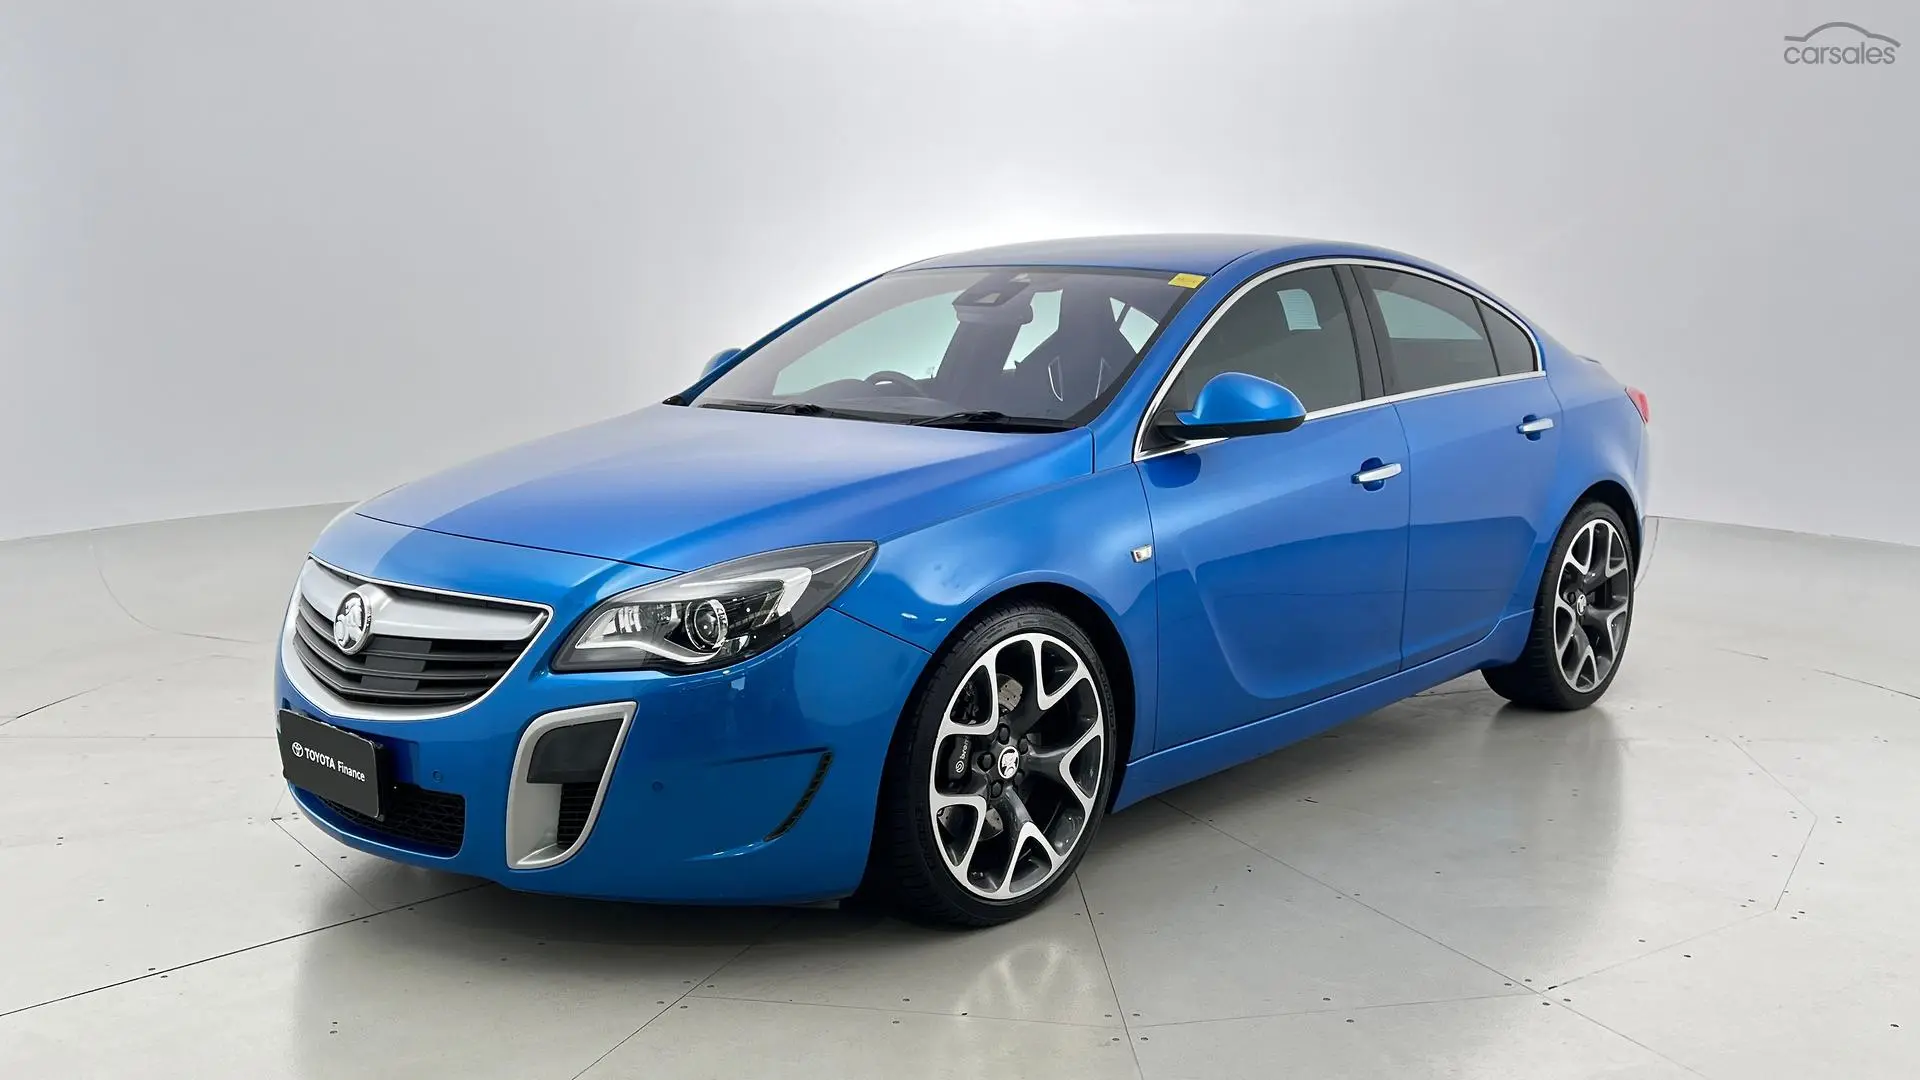 2015 Holden Insignia Image 9